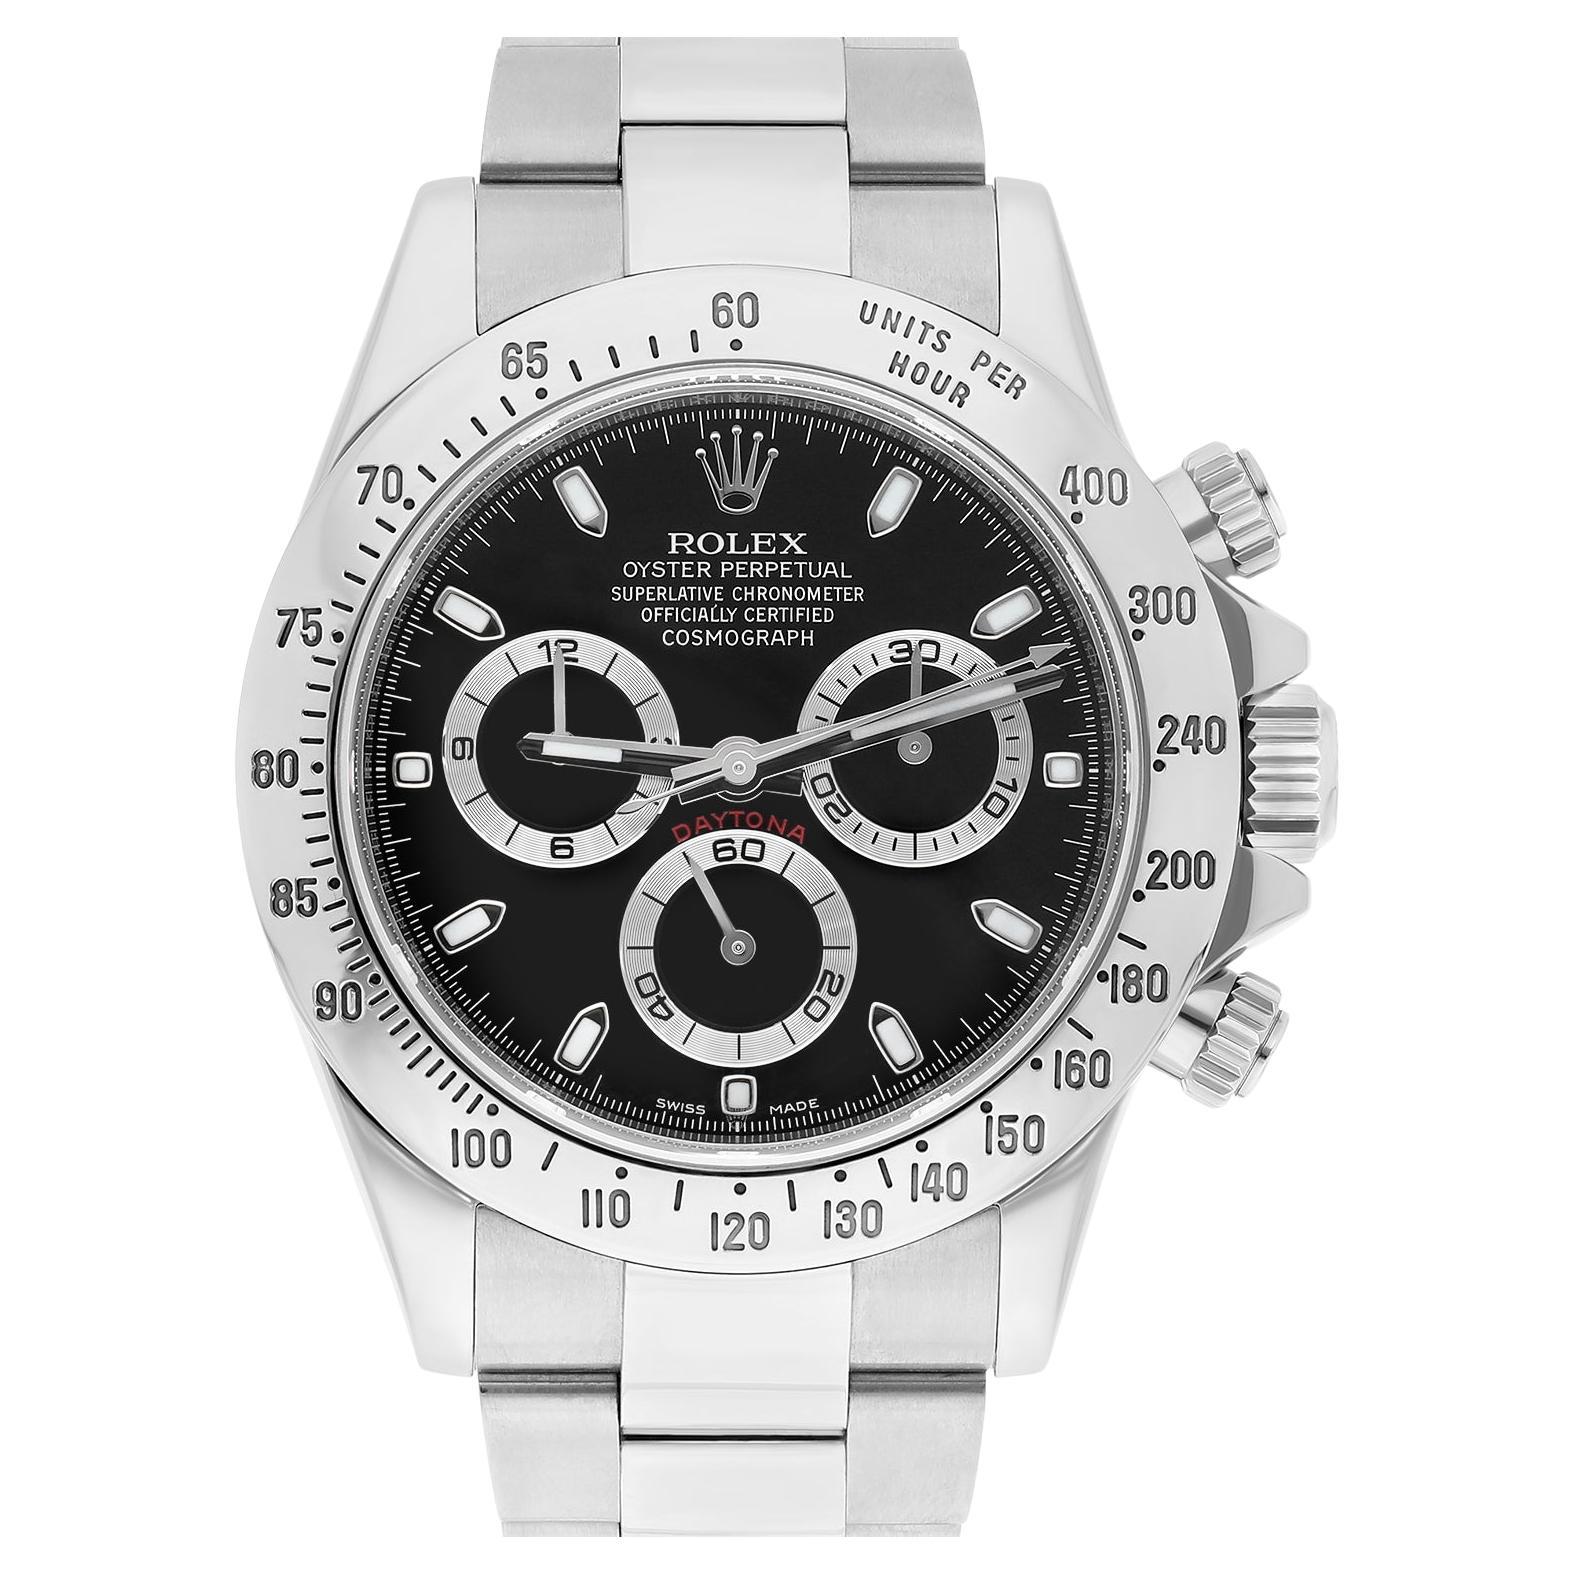 Rolex Cosmograph Daytona Stainless Steel 40mm Black Men's Watch 116520 For Sale